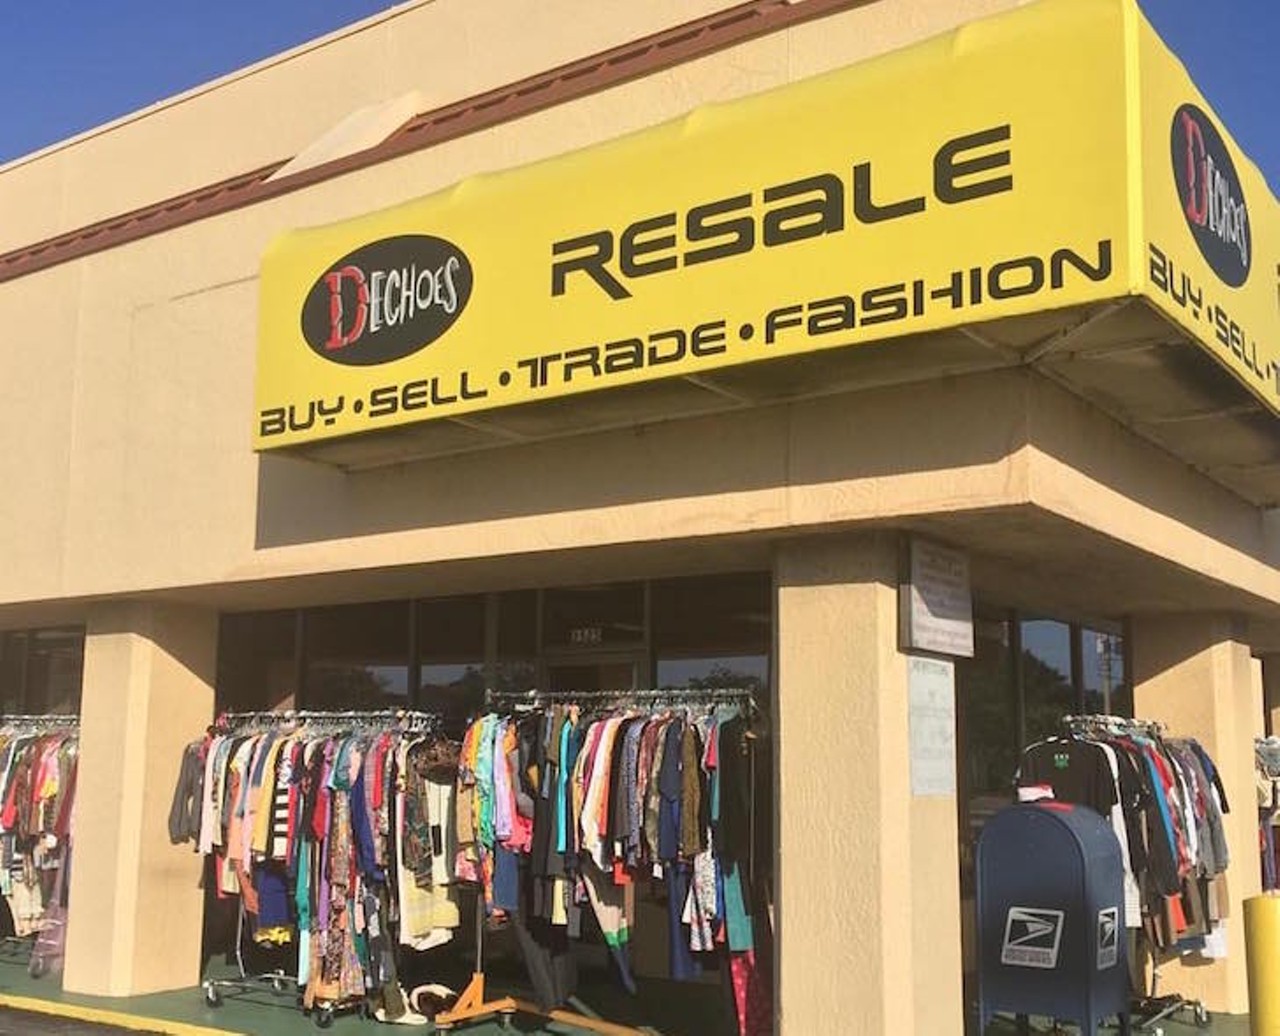 Dechoes
multiple locations 
In a way, Dechoes has set the scene for Orlando resale and consignment shops, now offering a more refined selection of gently-used clothing and designer accessories for men and women.
Photo via Dechoes Resale/Facebook